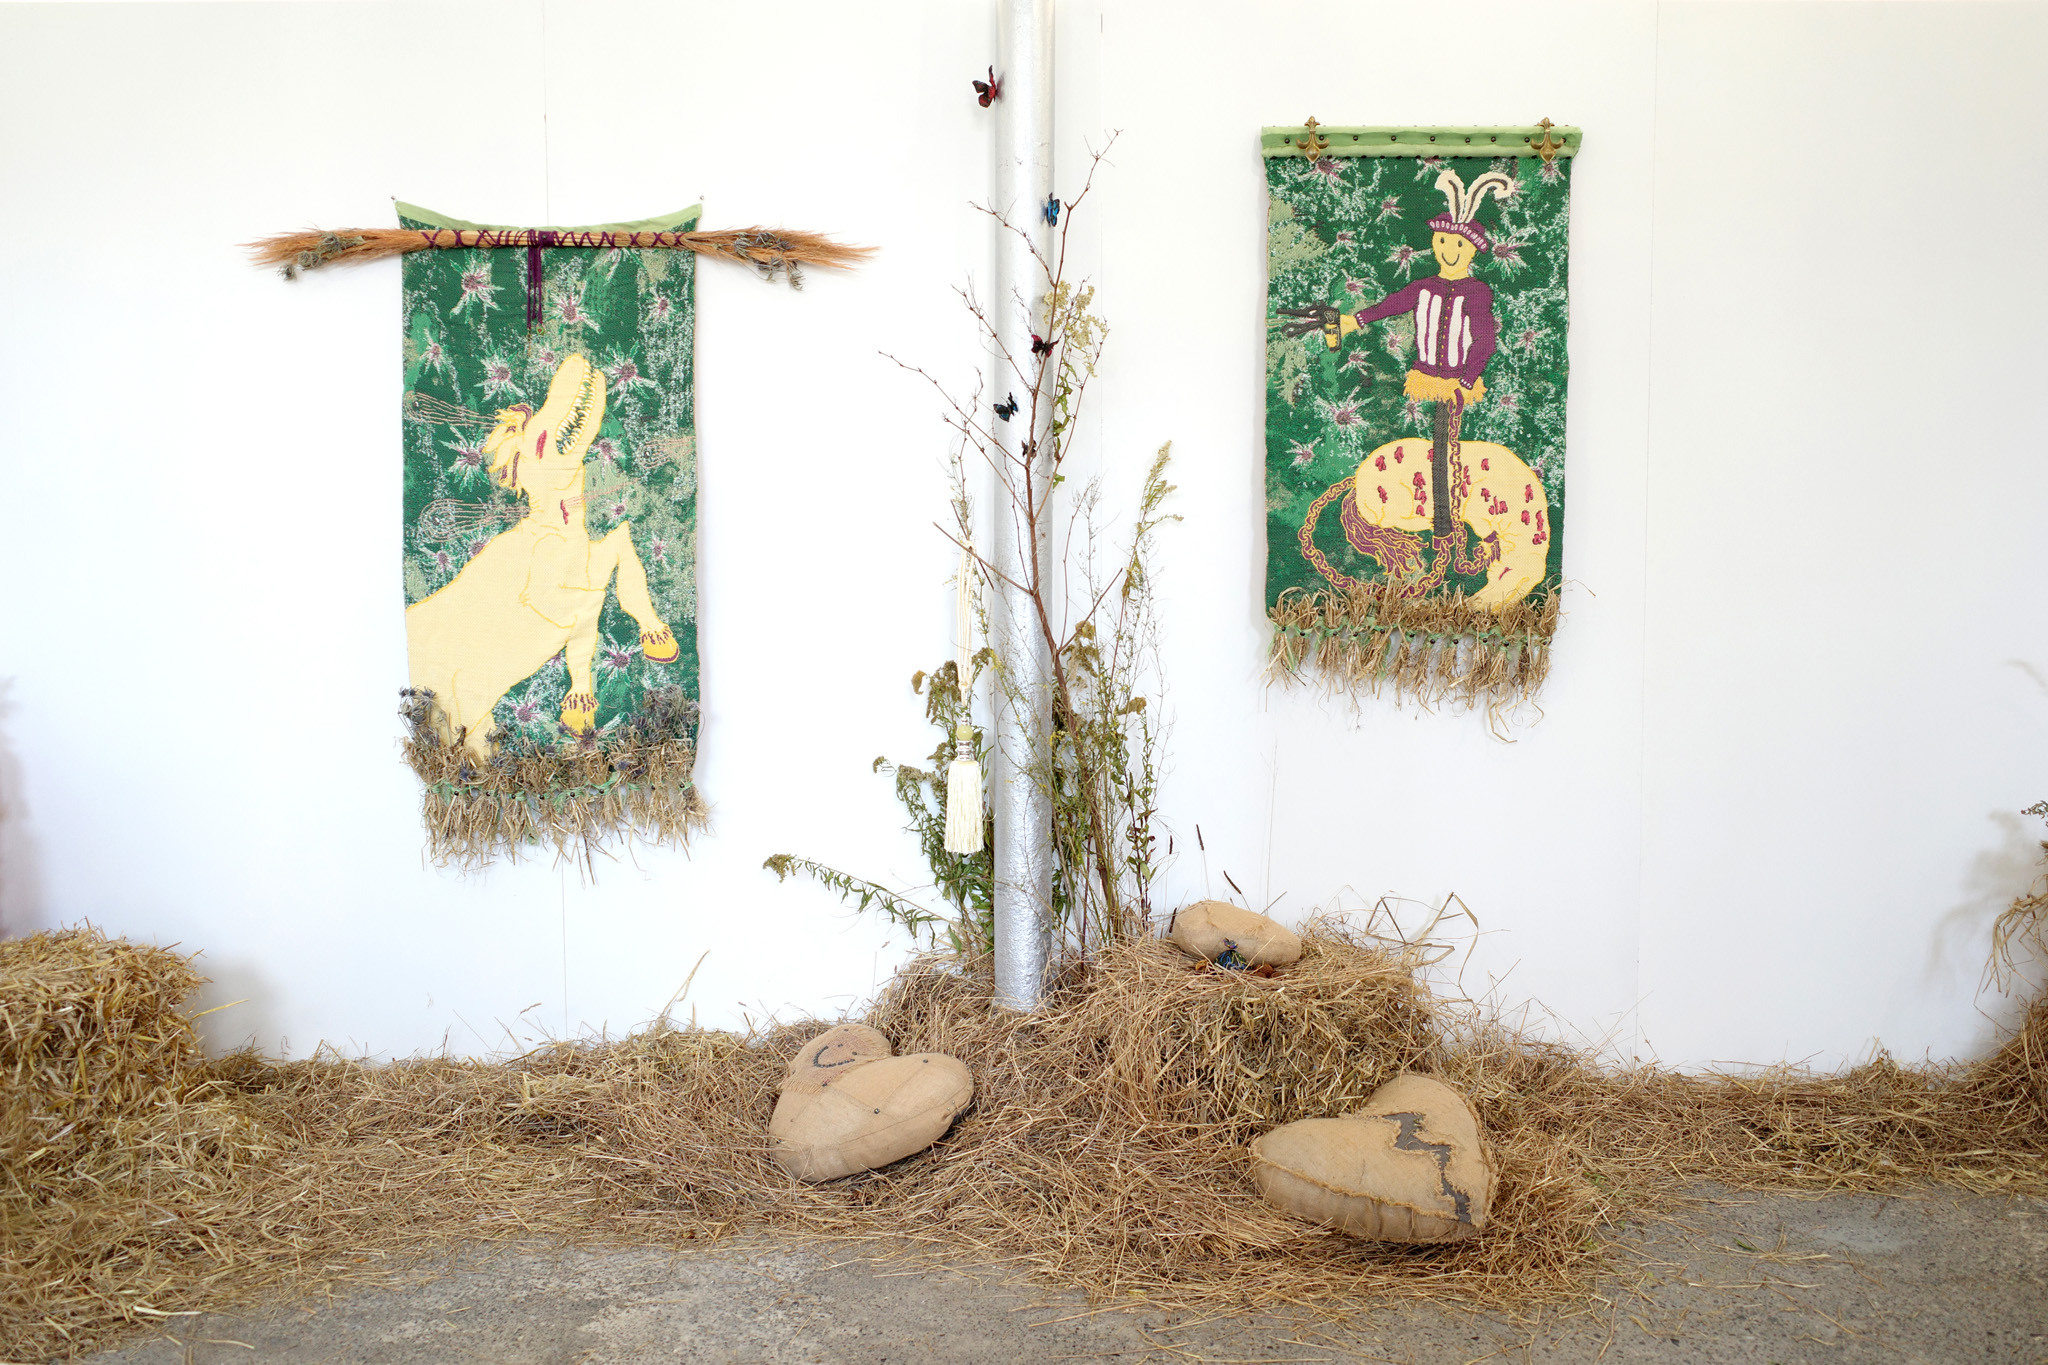 Olivia Rode Hvass, Hand Holding Memories (De dÃ¥rlige minder holder i hÃ¥nd), 2022. TC2-woven tapestries, upholstery, french lilies, thistles, hay. Photo: Anders Aarvik